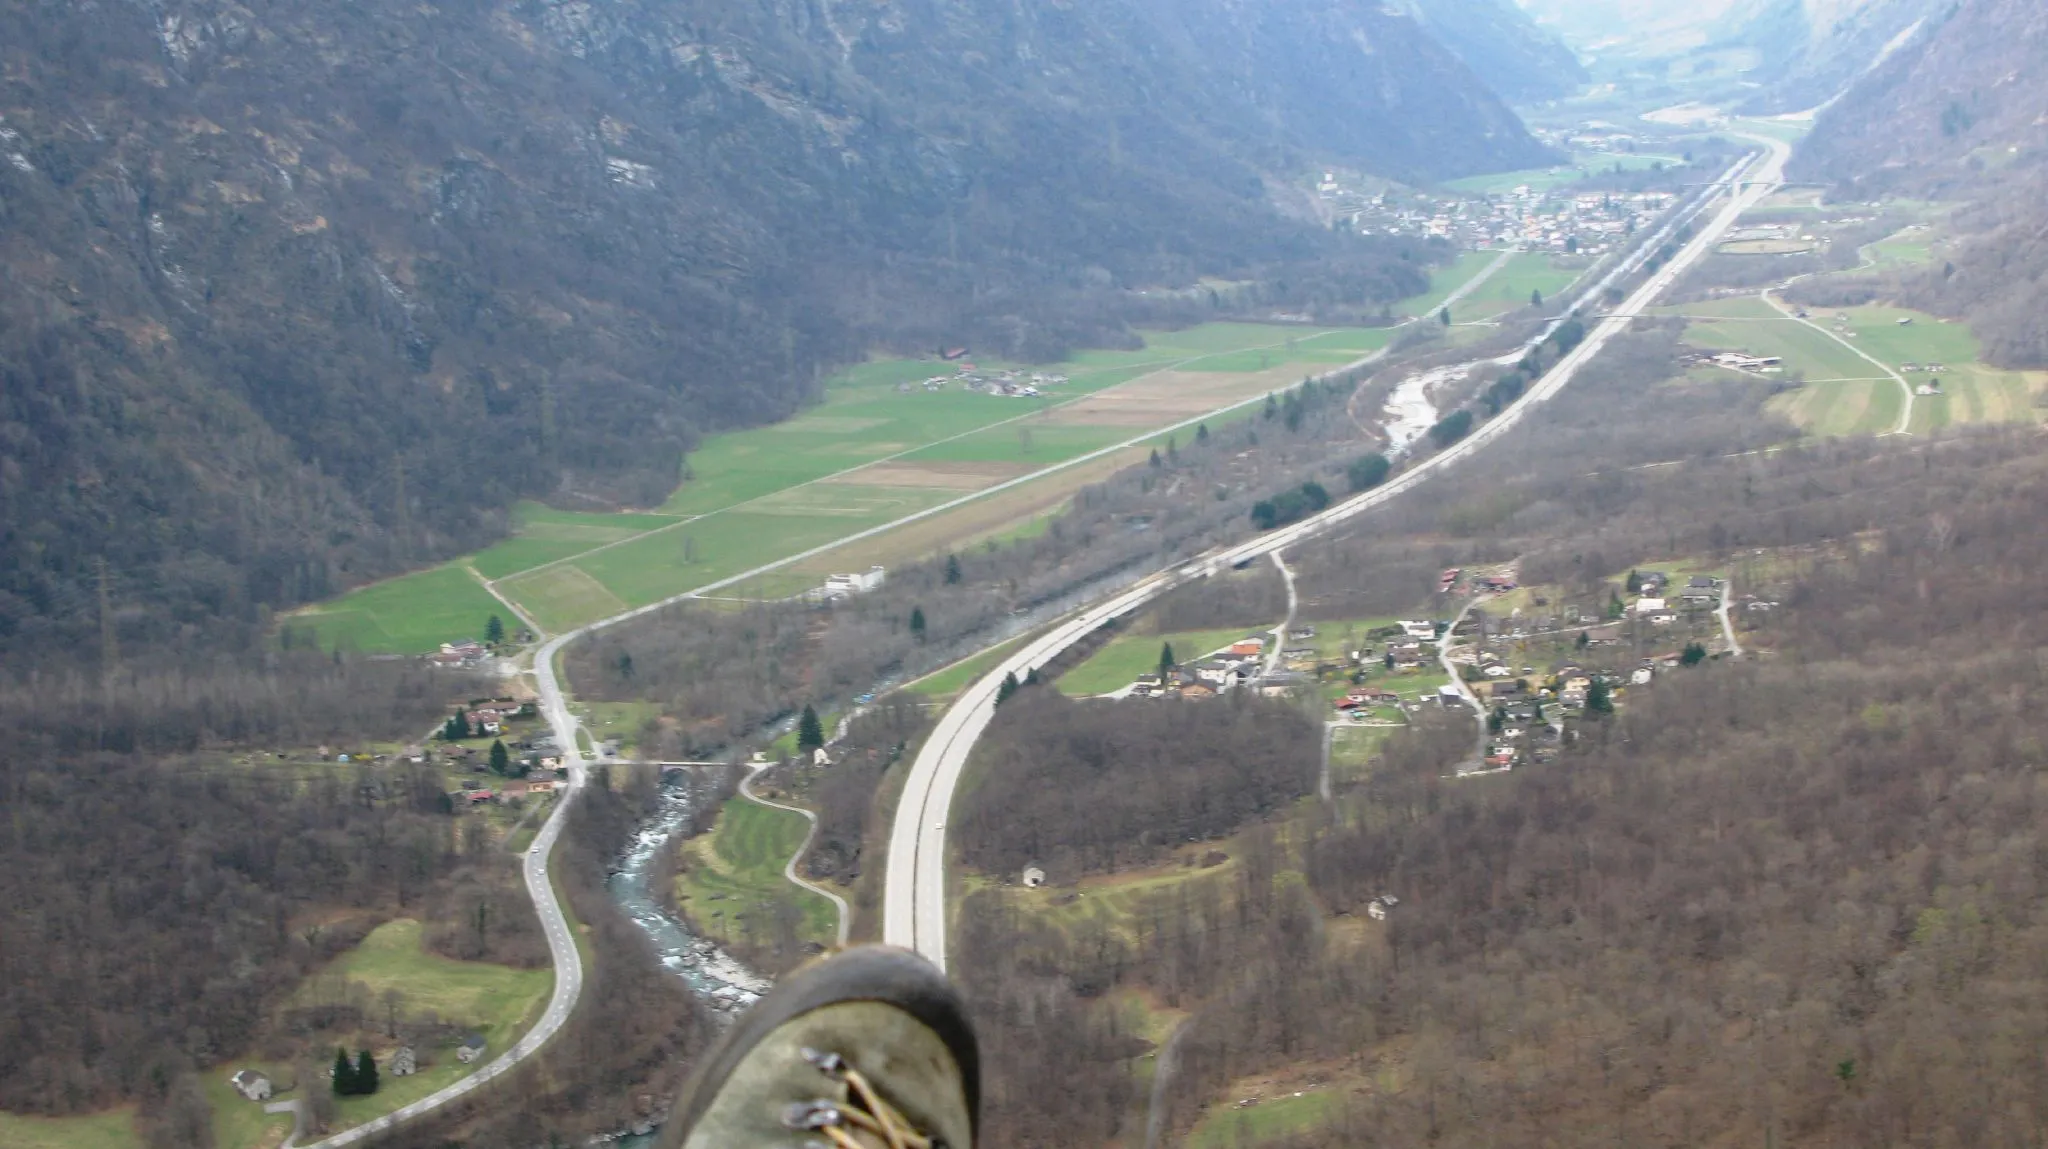 Photo showing: View from a paraglider over the plain between Sorte (in the foreground on the right of the motorway) and Lostallo (in the background on the left of the motorway) in the Swiss canton of Grisons. In the centre of the picture, between the highway and the main road 13, is the nationally important alluvial zone Rosera, through which the Moësa flows. In the background, the nationally important dry grassland/pasture Von (area of over 8 ha) is visible on the right of the motorway at the height of Lostallo.